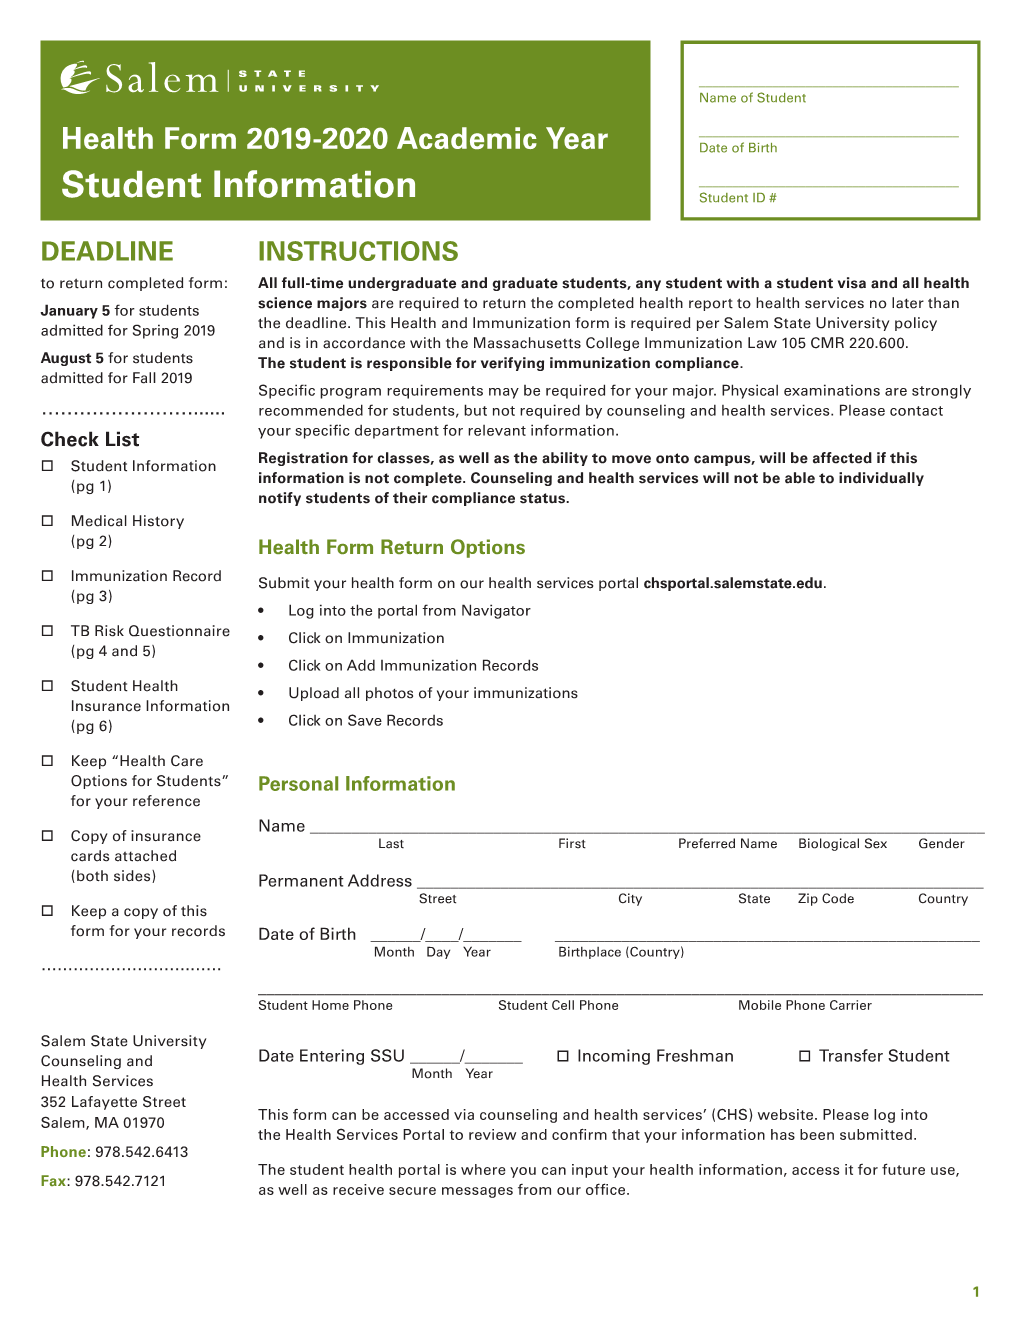 Health Form 2019-2020 Academic Year Student Information